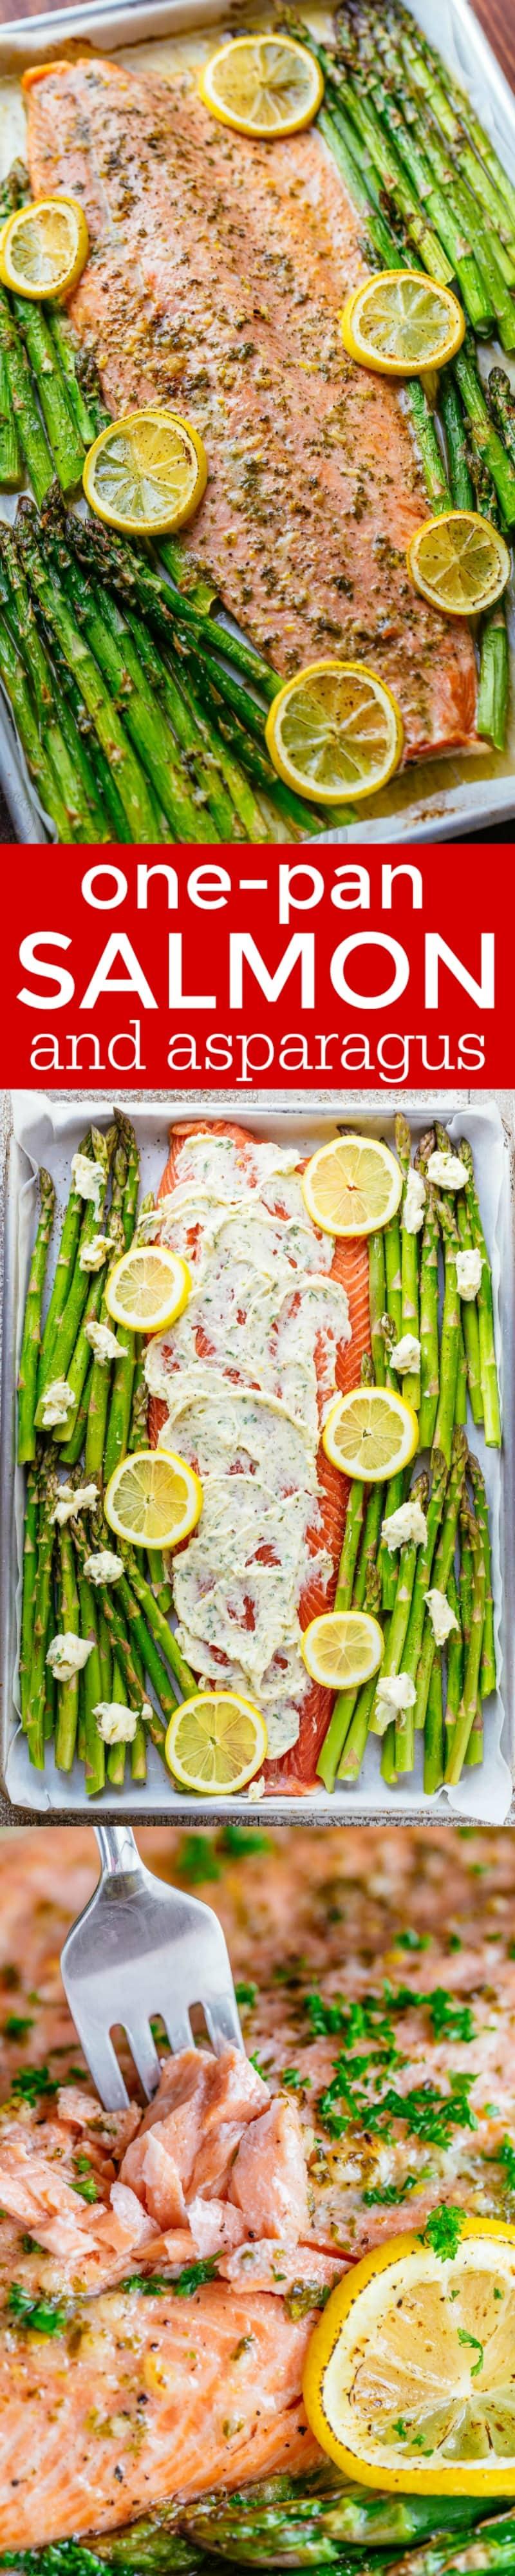 One Pan Salmon and Asparagus with Garlic Herb Butter One Pan Salmon and Asparagus with Garlic Herb Butter 6 servings. Ready in 25 min.